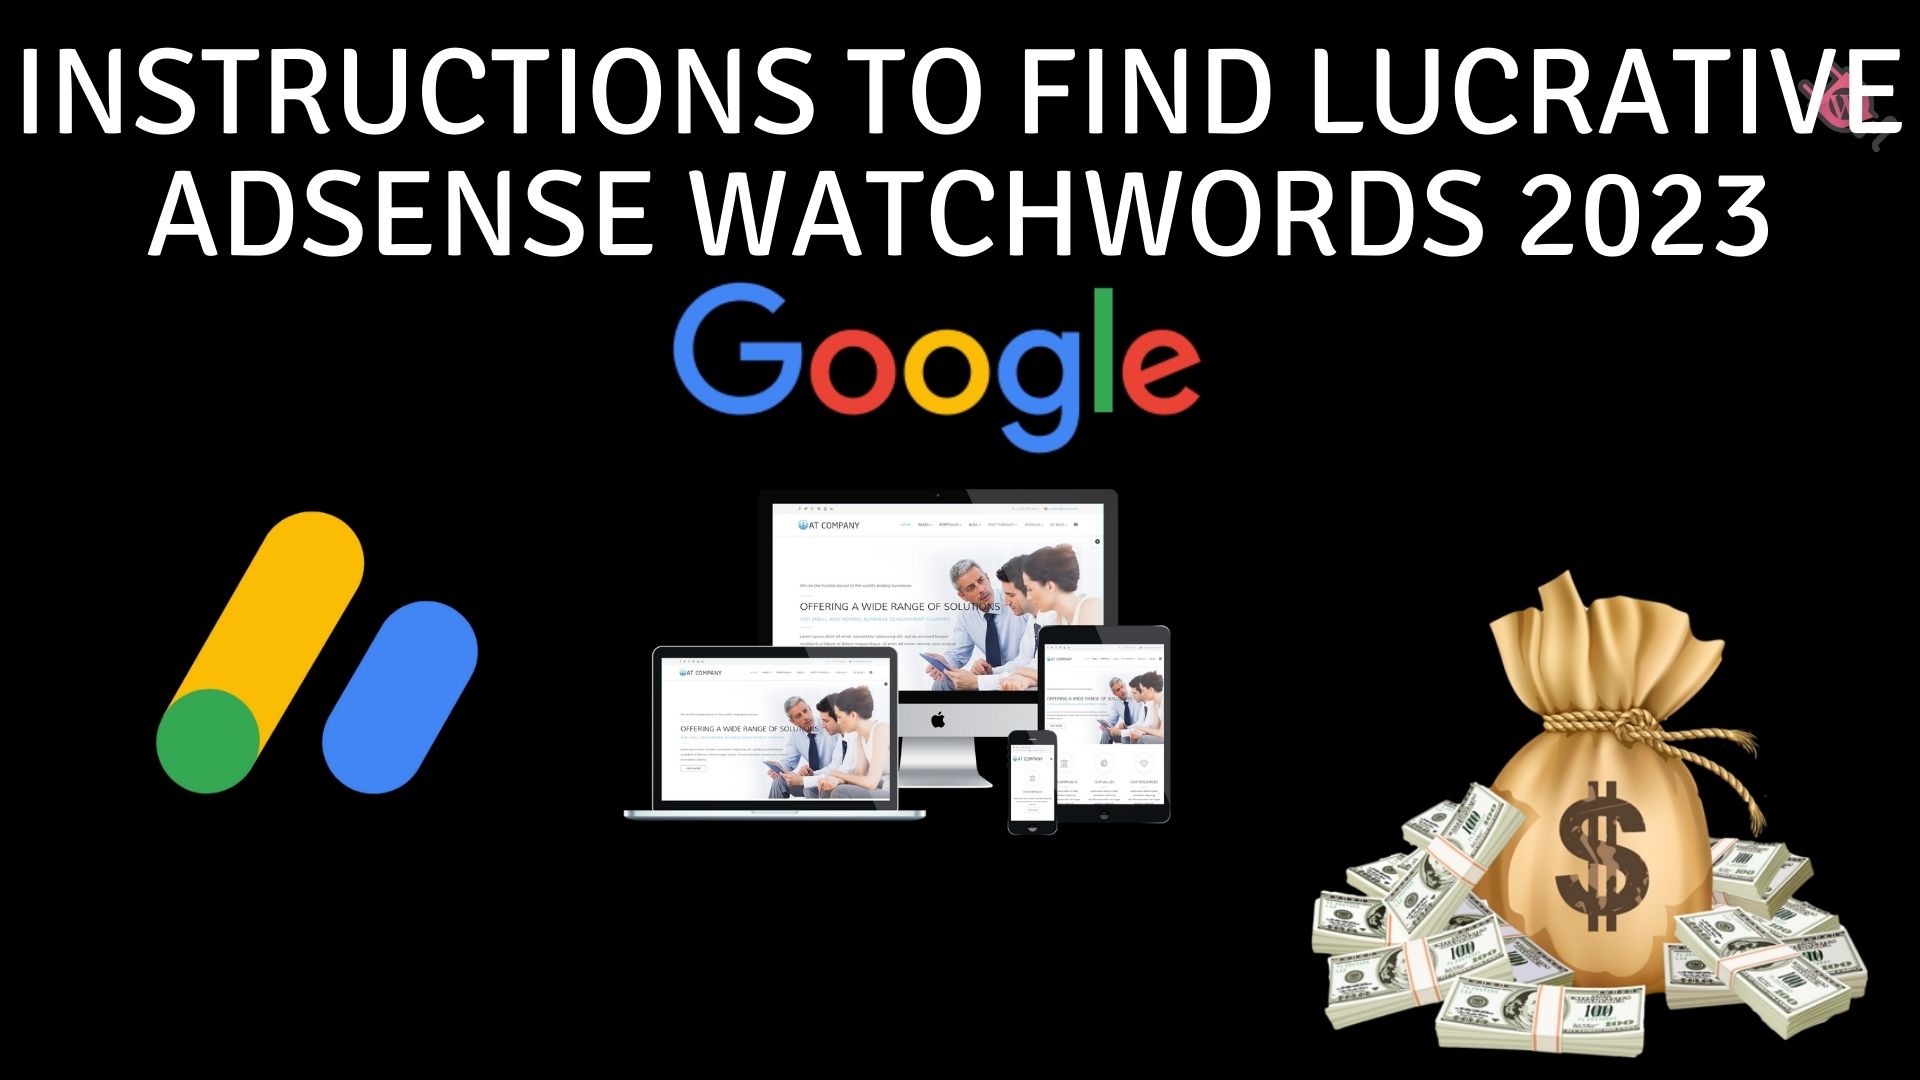 Instructions to find lucrative adsense watchwords 2023